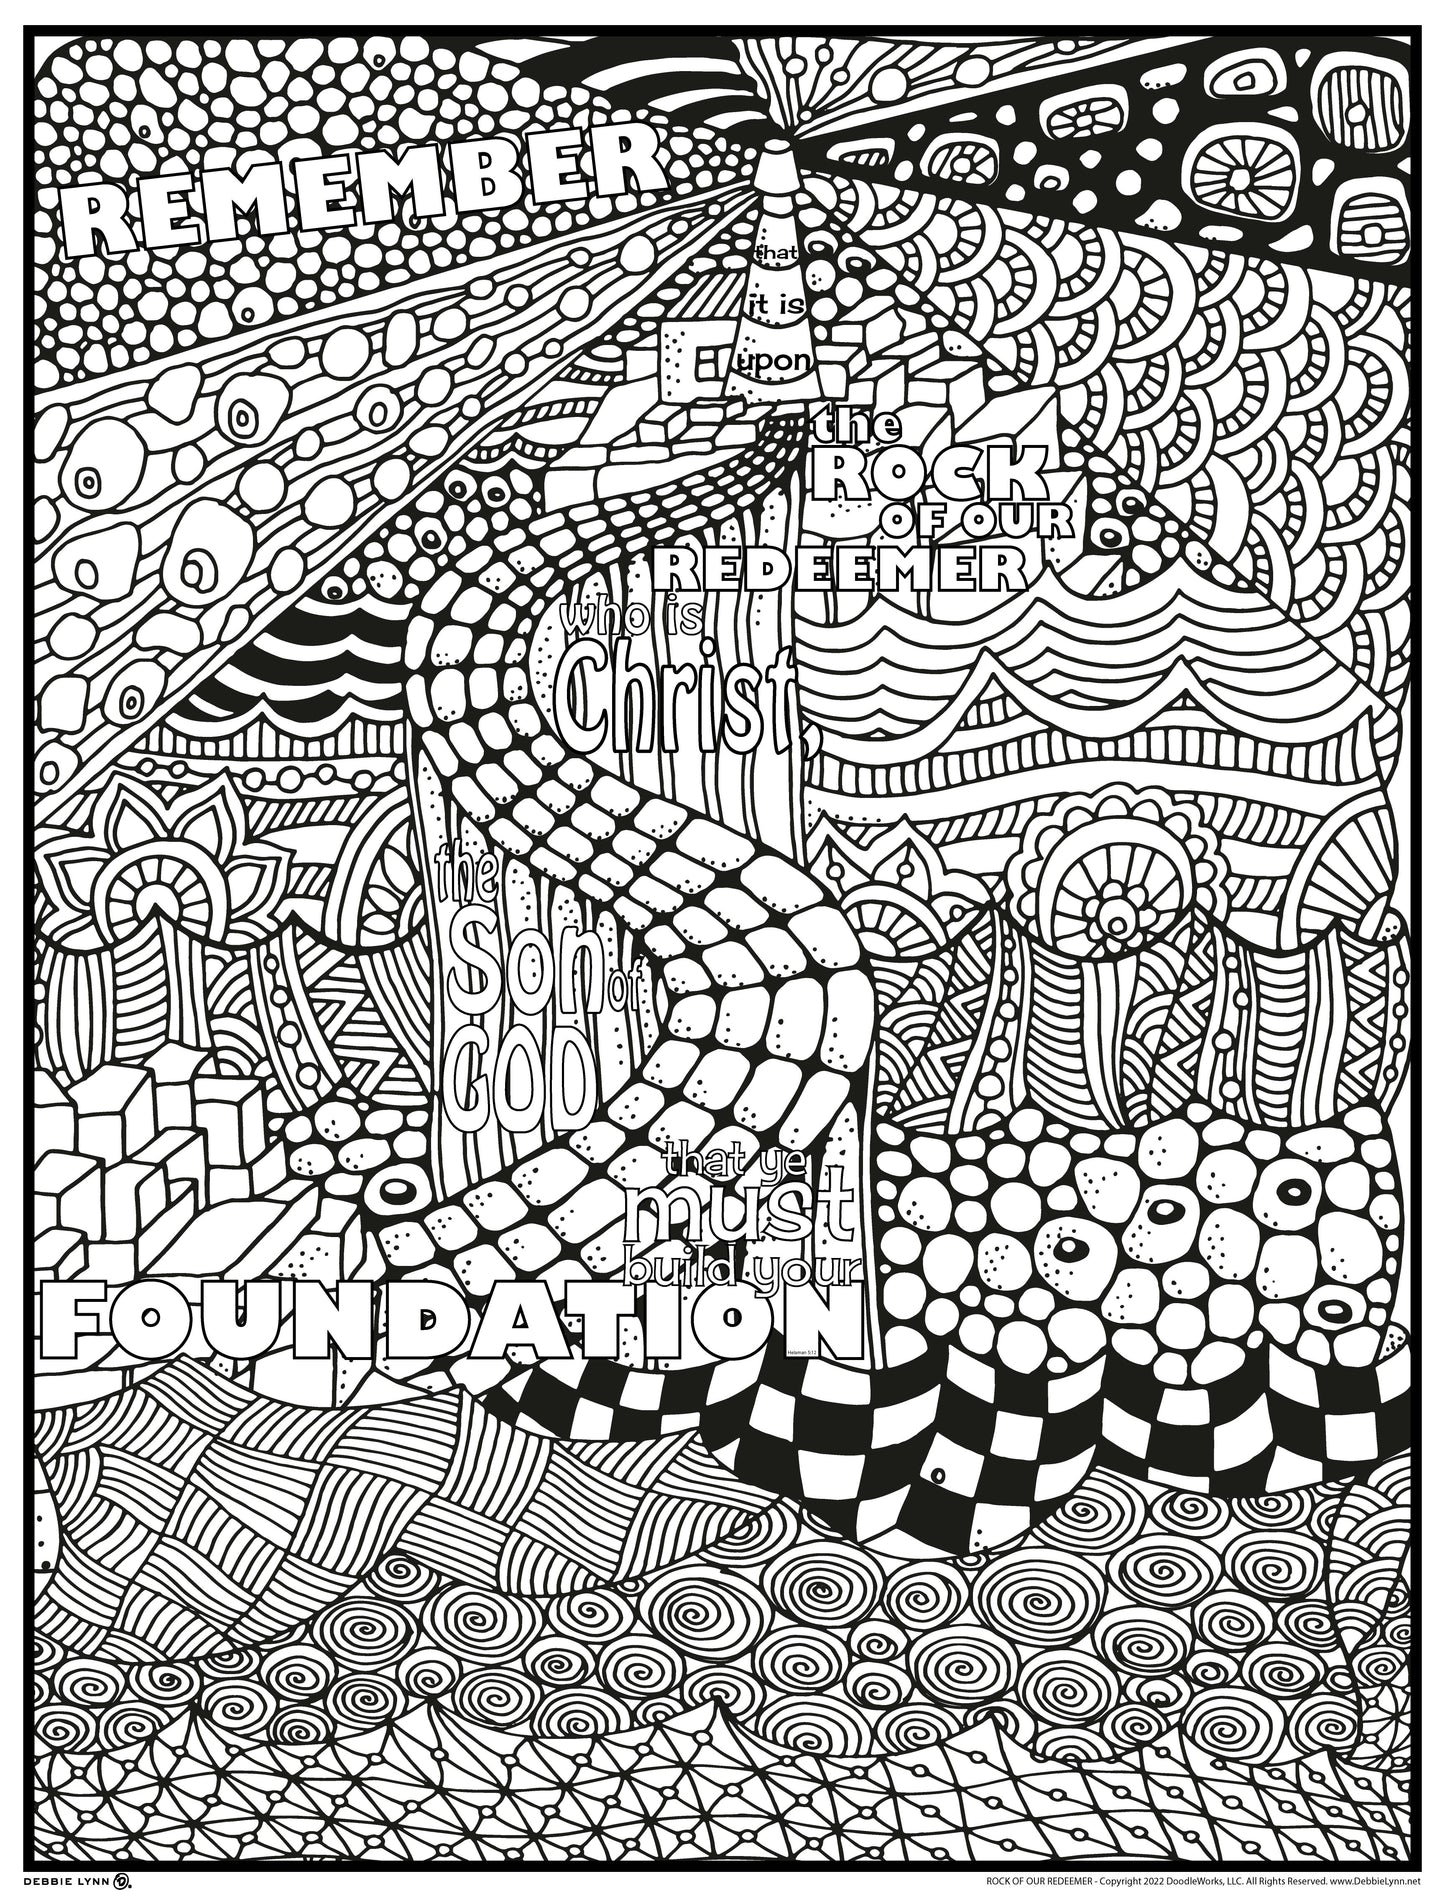 ROCK OF OUR REDEEMER FAITH PERSONALIZED GIANT COLORING POSTER 46"x60"